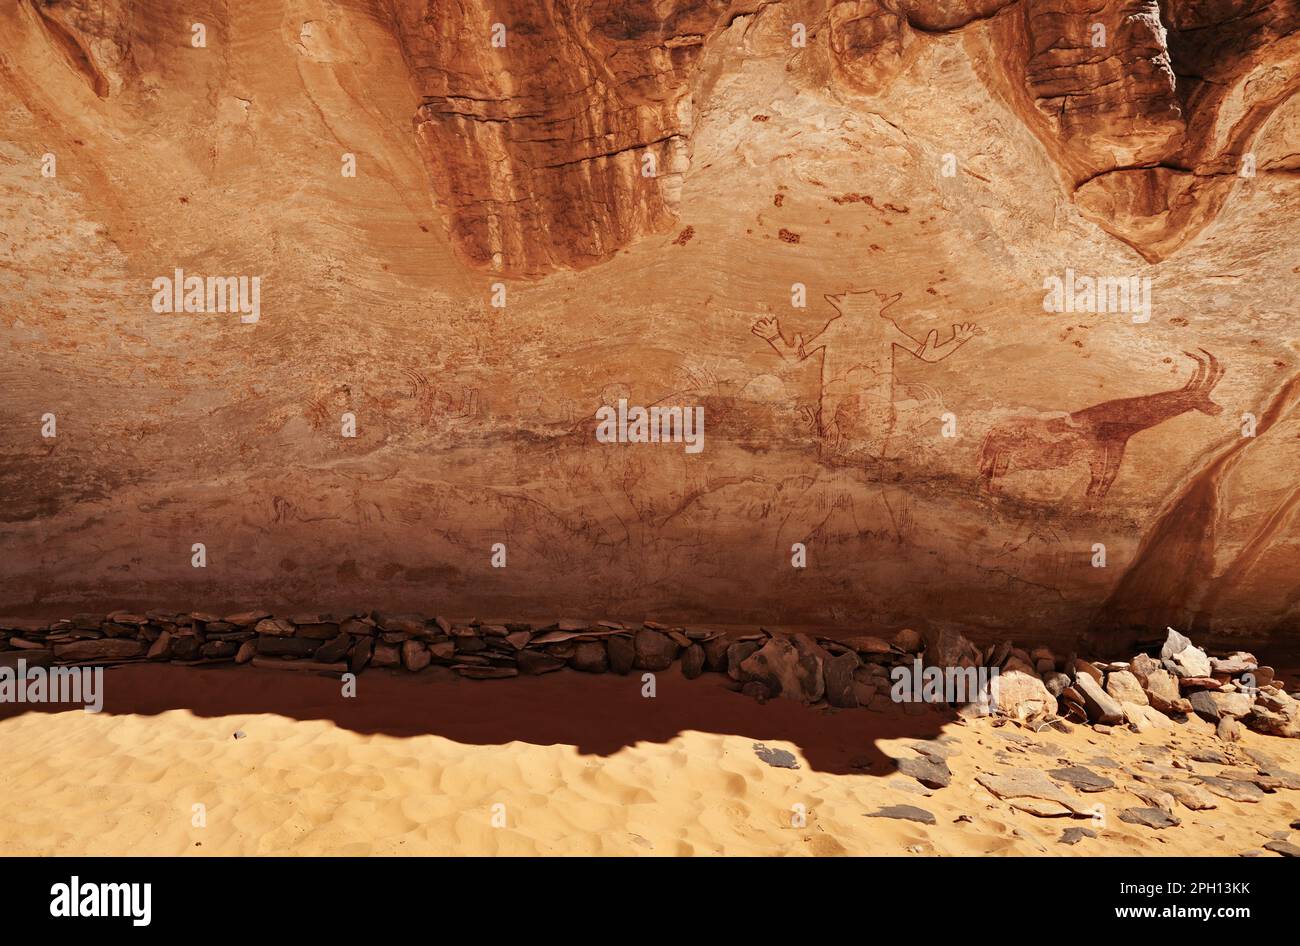 Fragment of rock with ancient paintings, Tassili N'Ajjer, Algeria Stock Photo